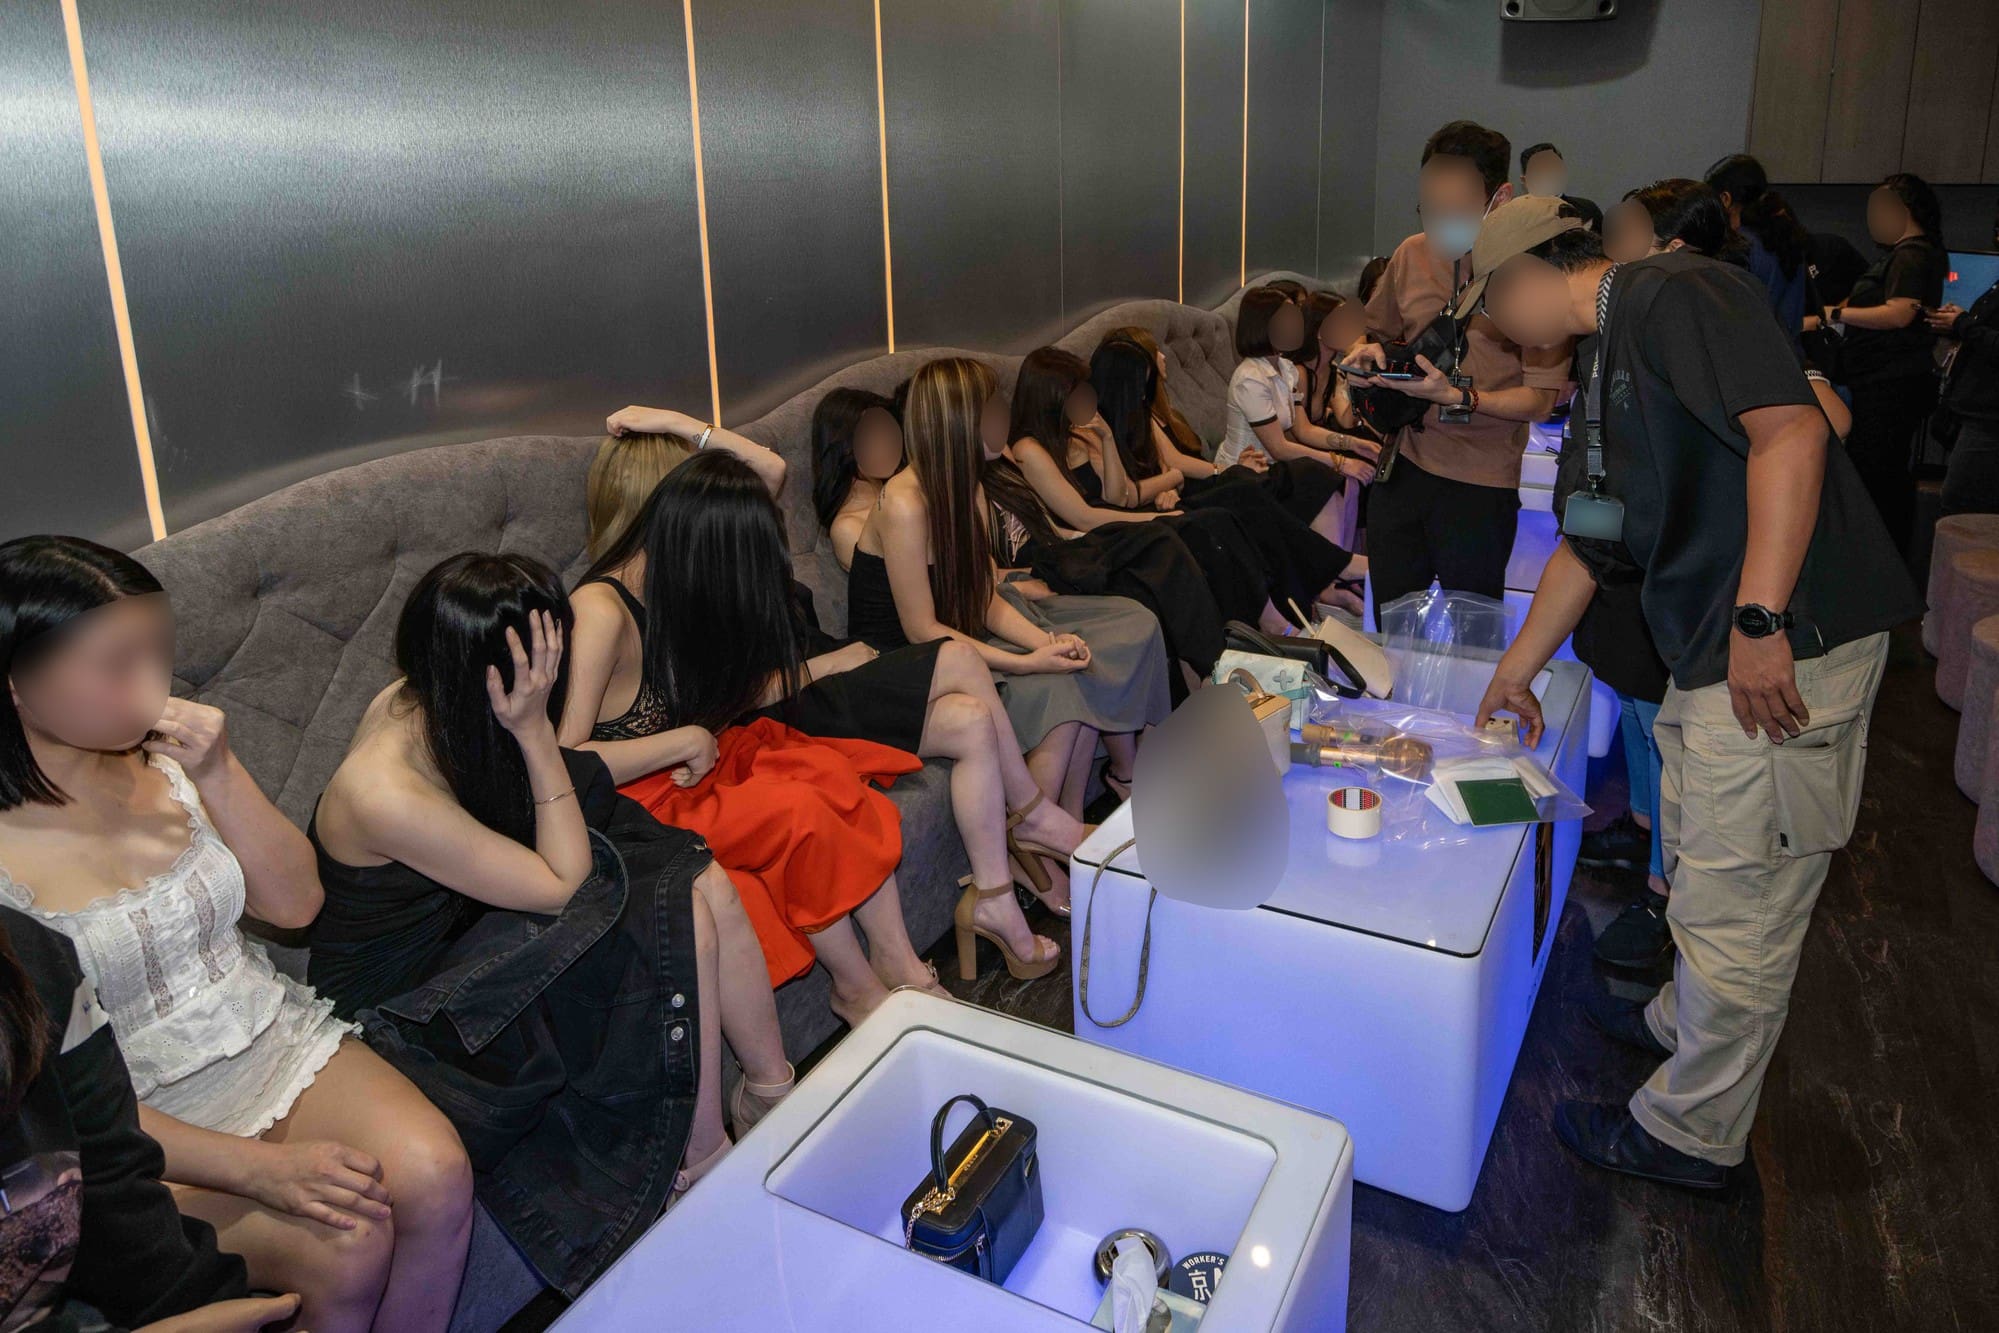 a photo of a ktv lounge with many women seated on a long sofa chair being checked by police officers